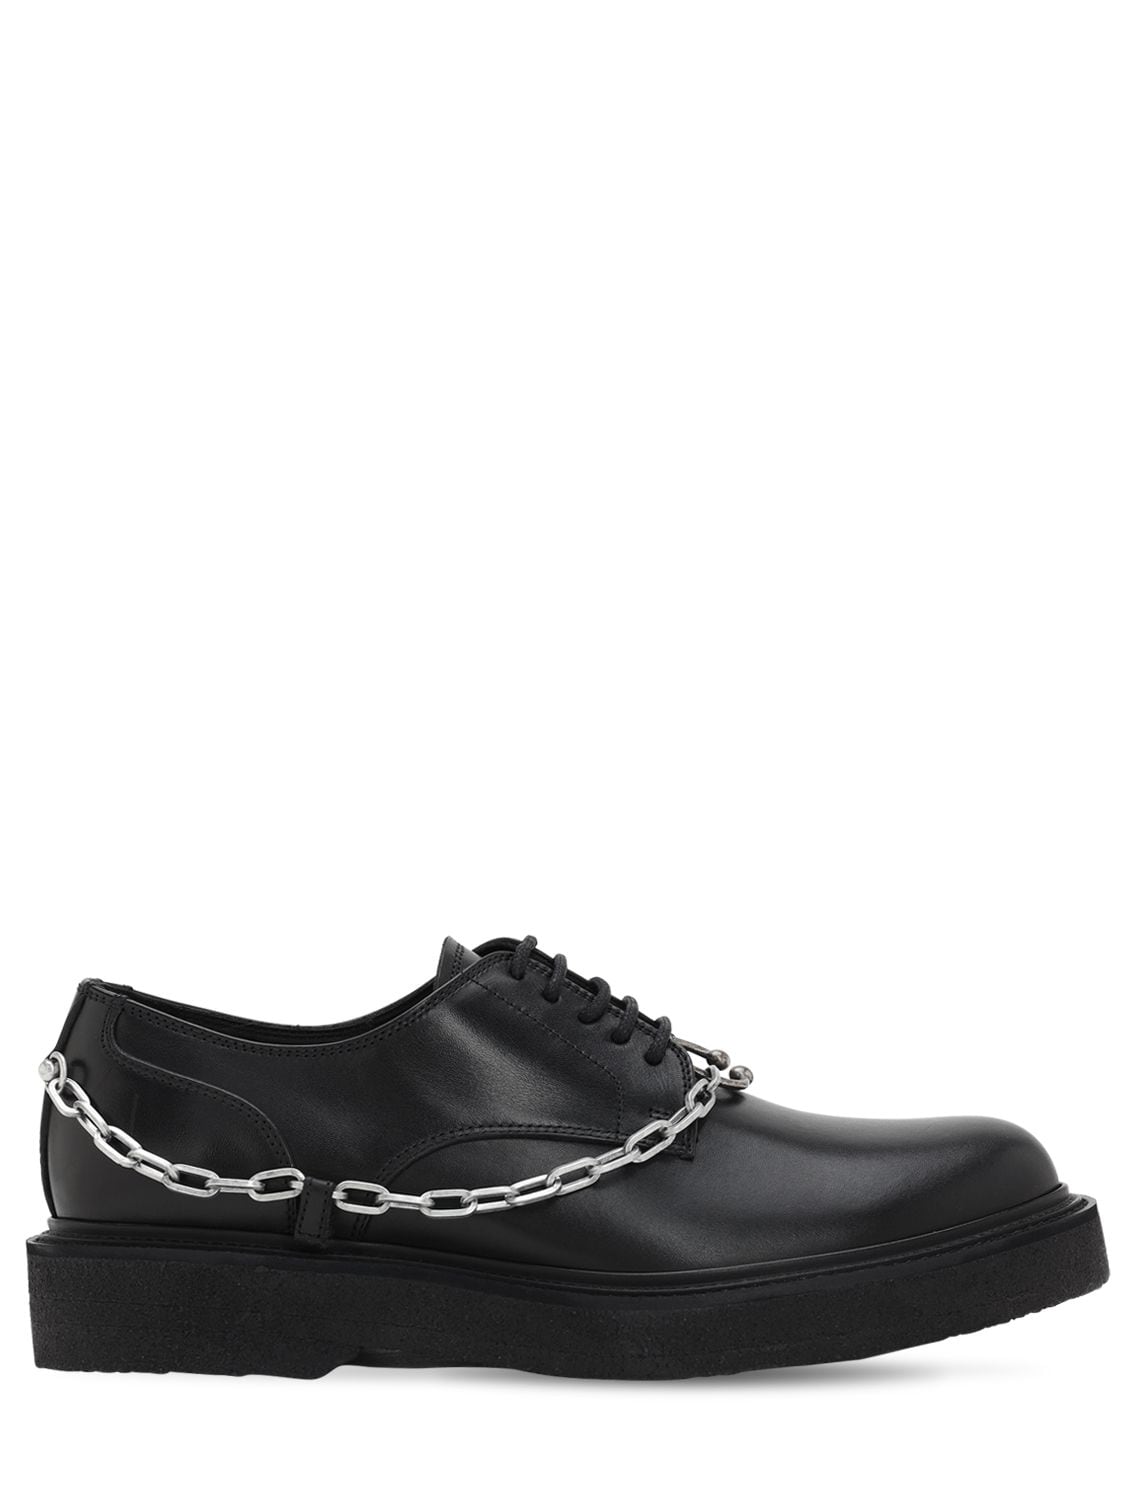 Neil Barrett Leather Lace-up Shoes W/ Chain In Black